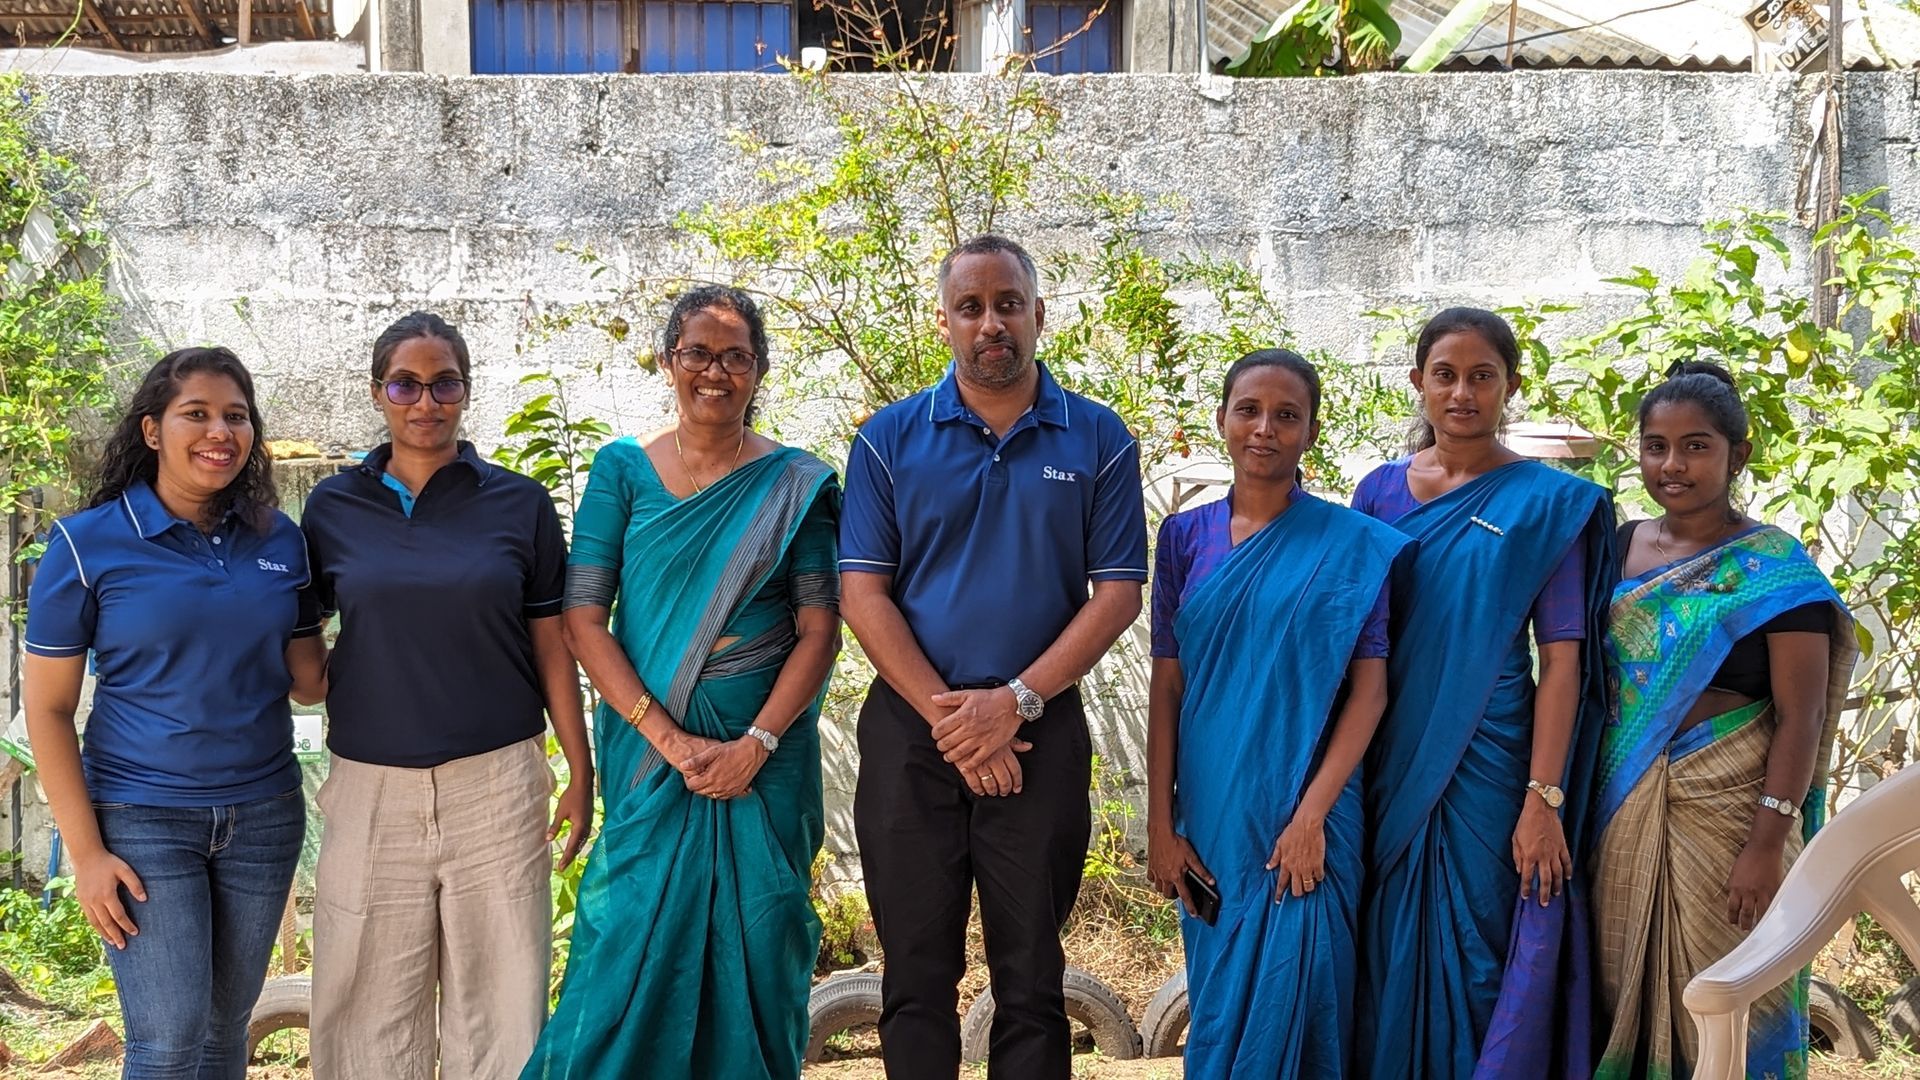 Colleagues from our Stax Colombo gather for a photo while supporting Sardovya's community kitchen program